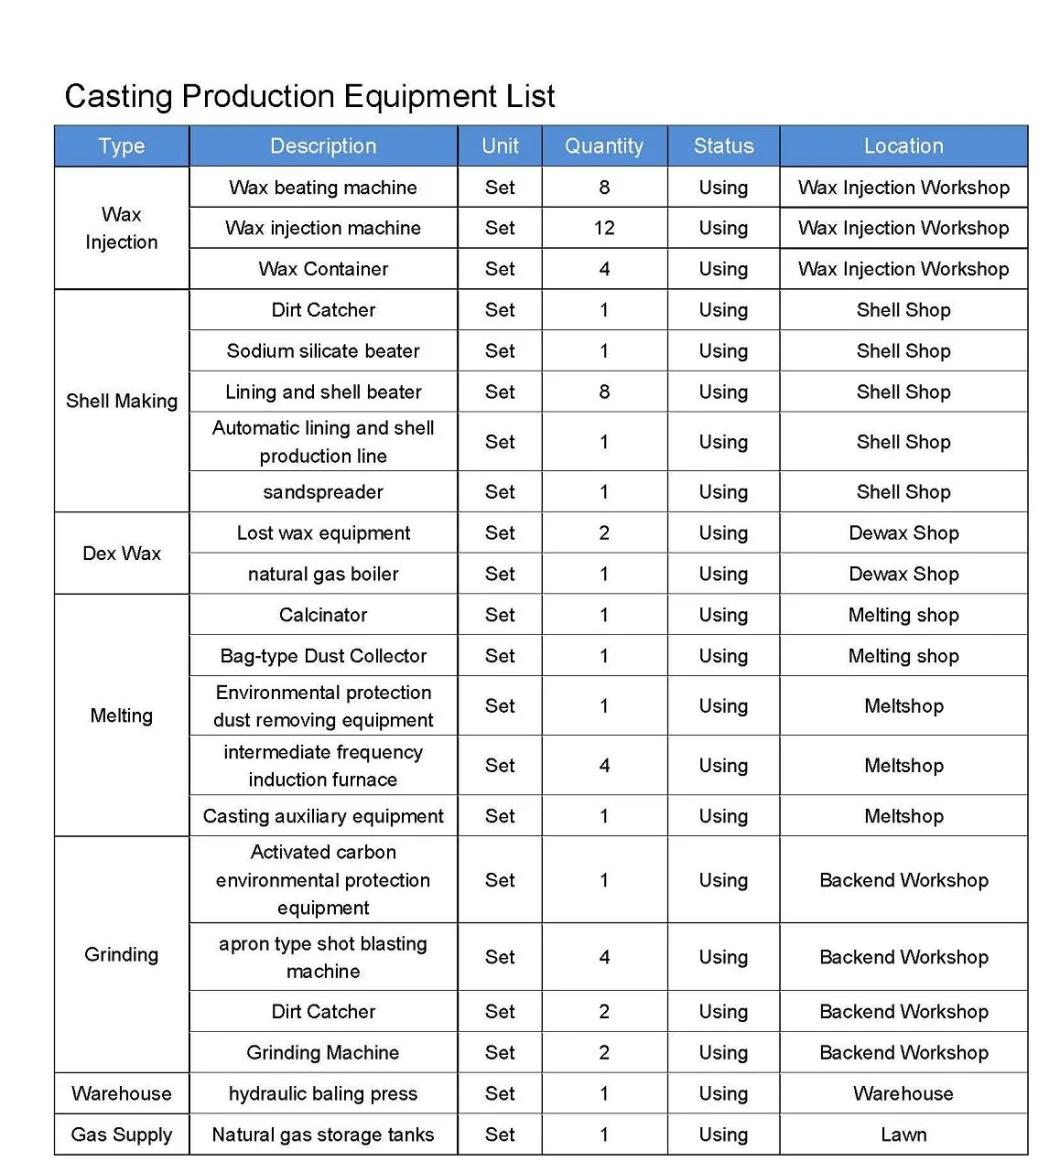 Engineering Machinery Casting Parts Manufacturers in China Steel Casting Foundry